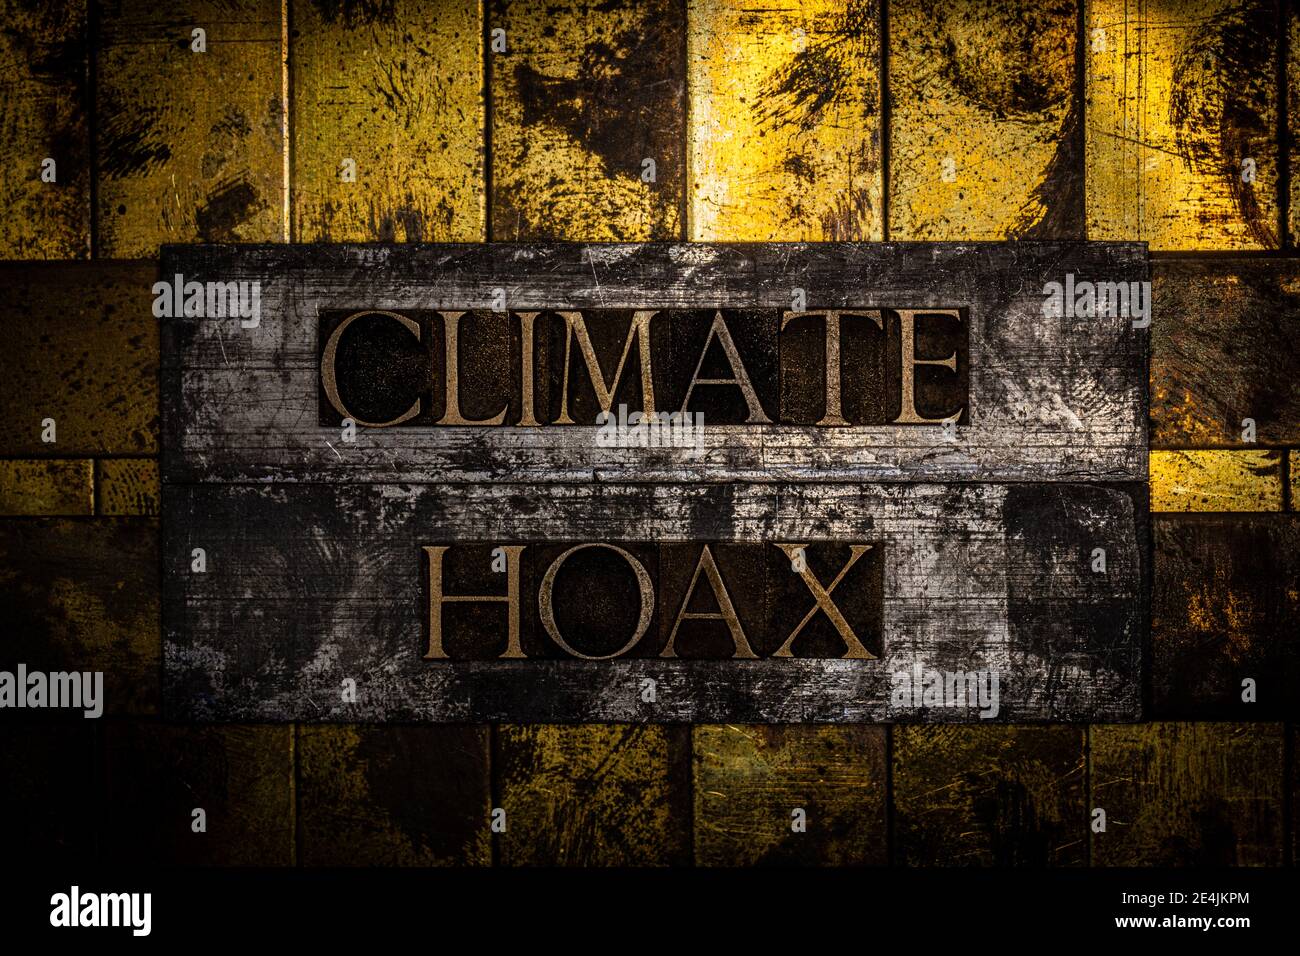 Climate Hoax text on textured lead with grungy copper and gold background Stock Photo